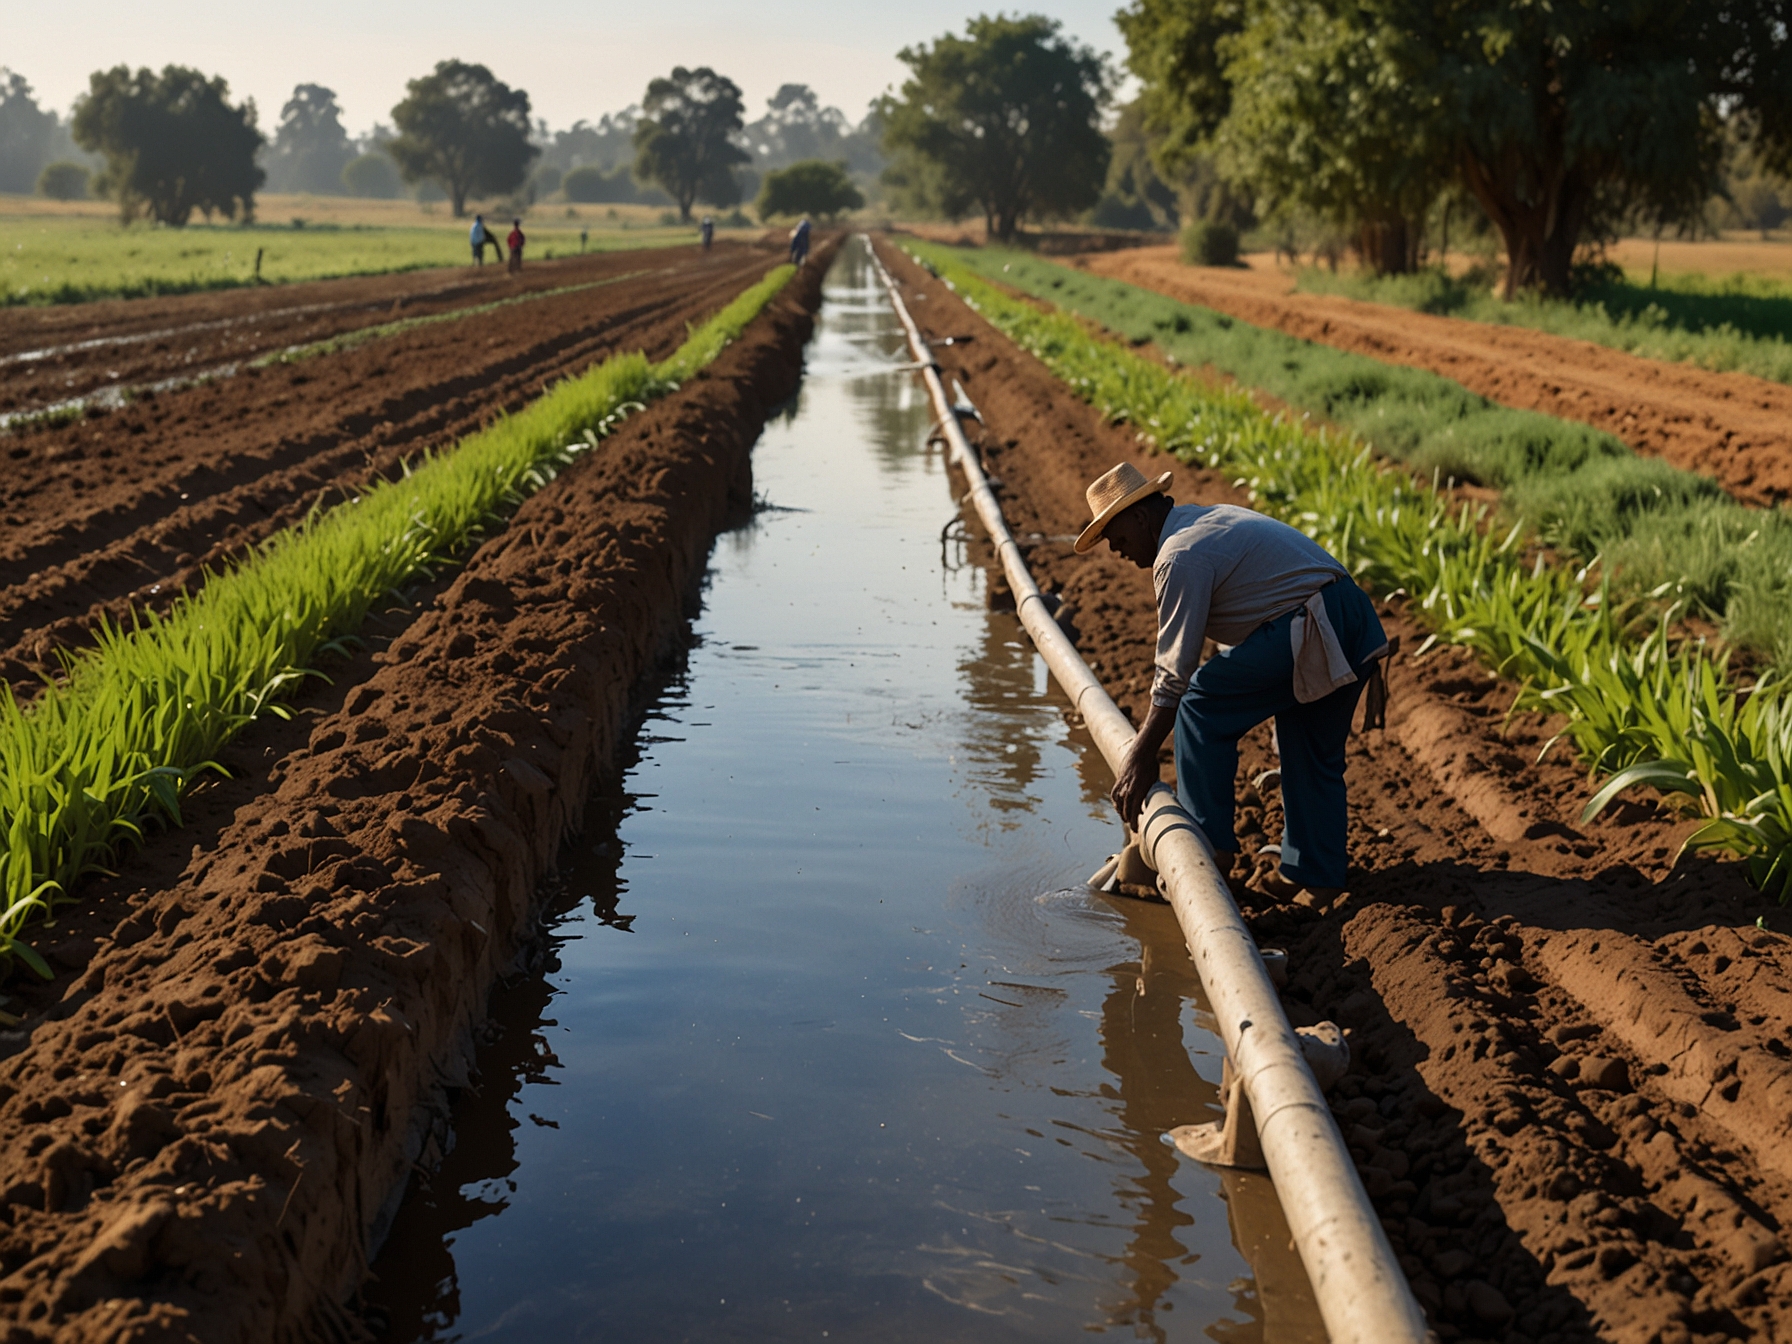 Farmers irrigating crops with new water pipelines. This image highlights the fund's impact on agricultural resilience and water resource management, essential for withstanding droughts and floods.